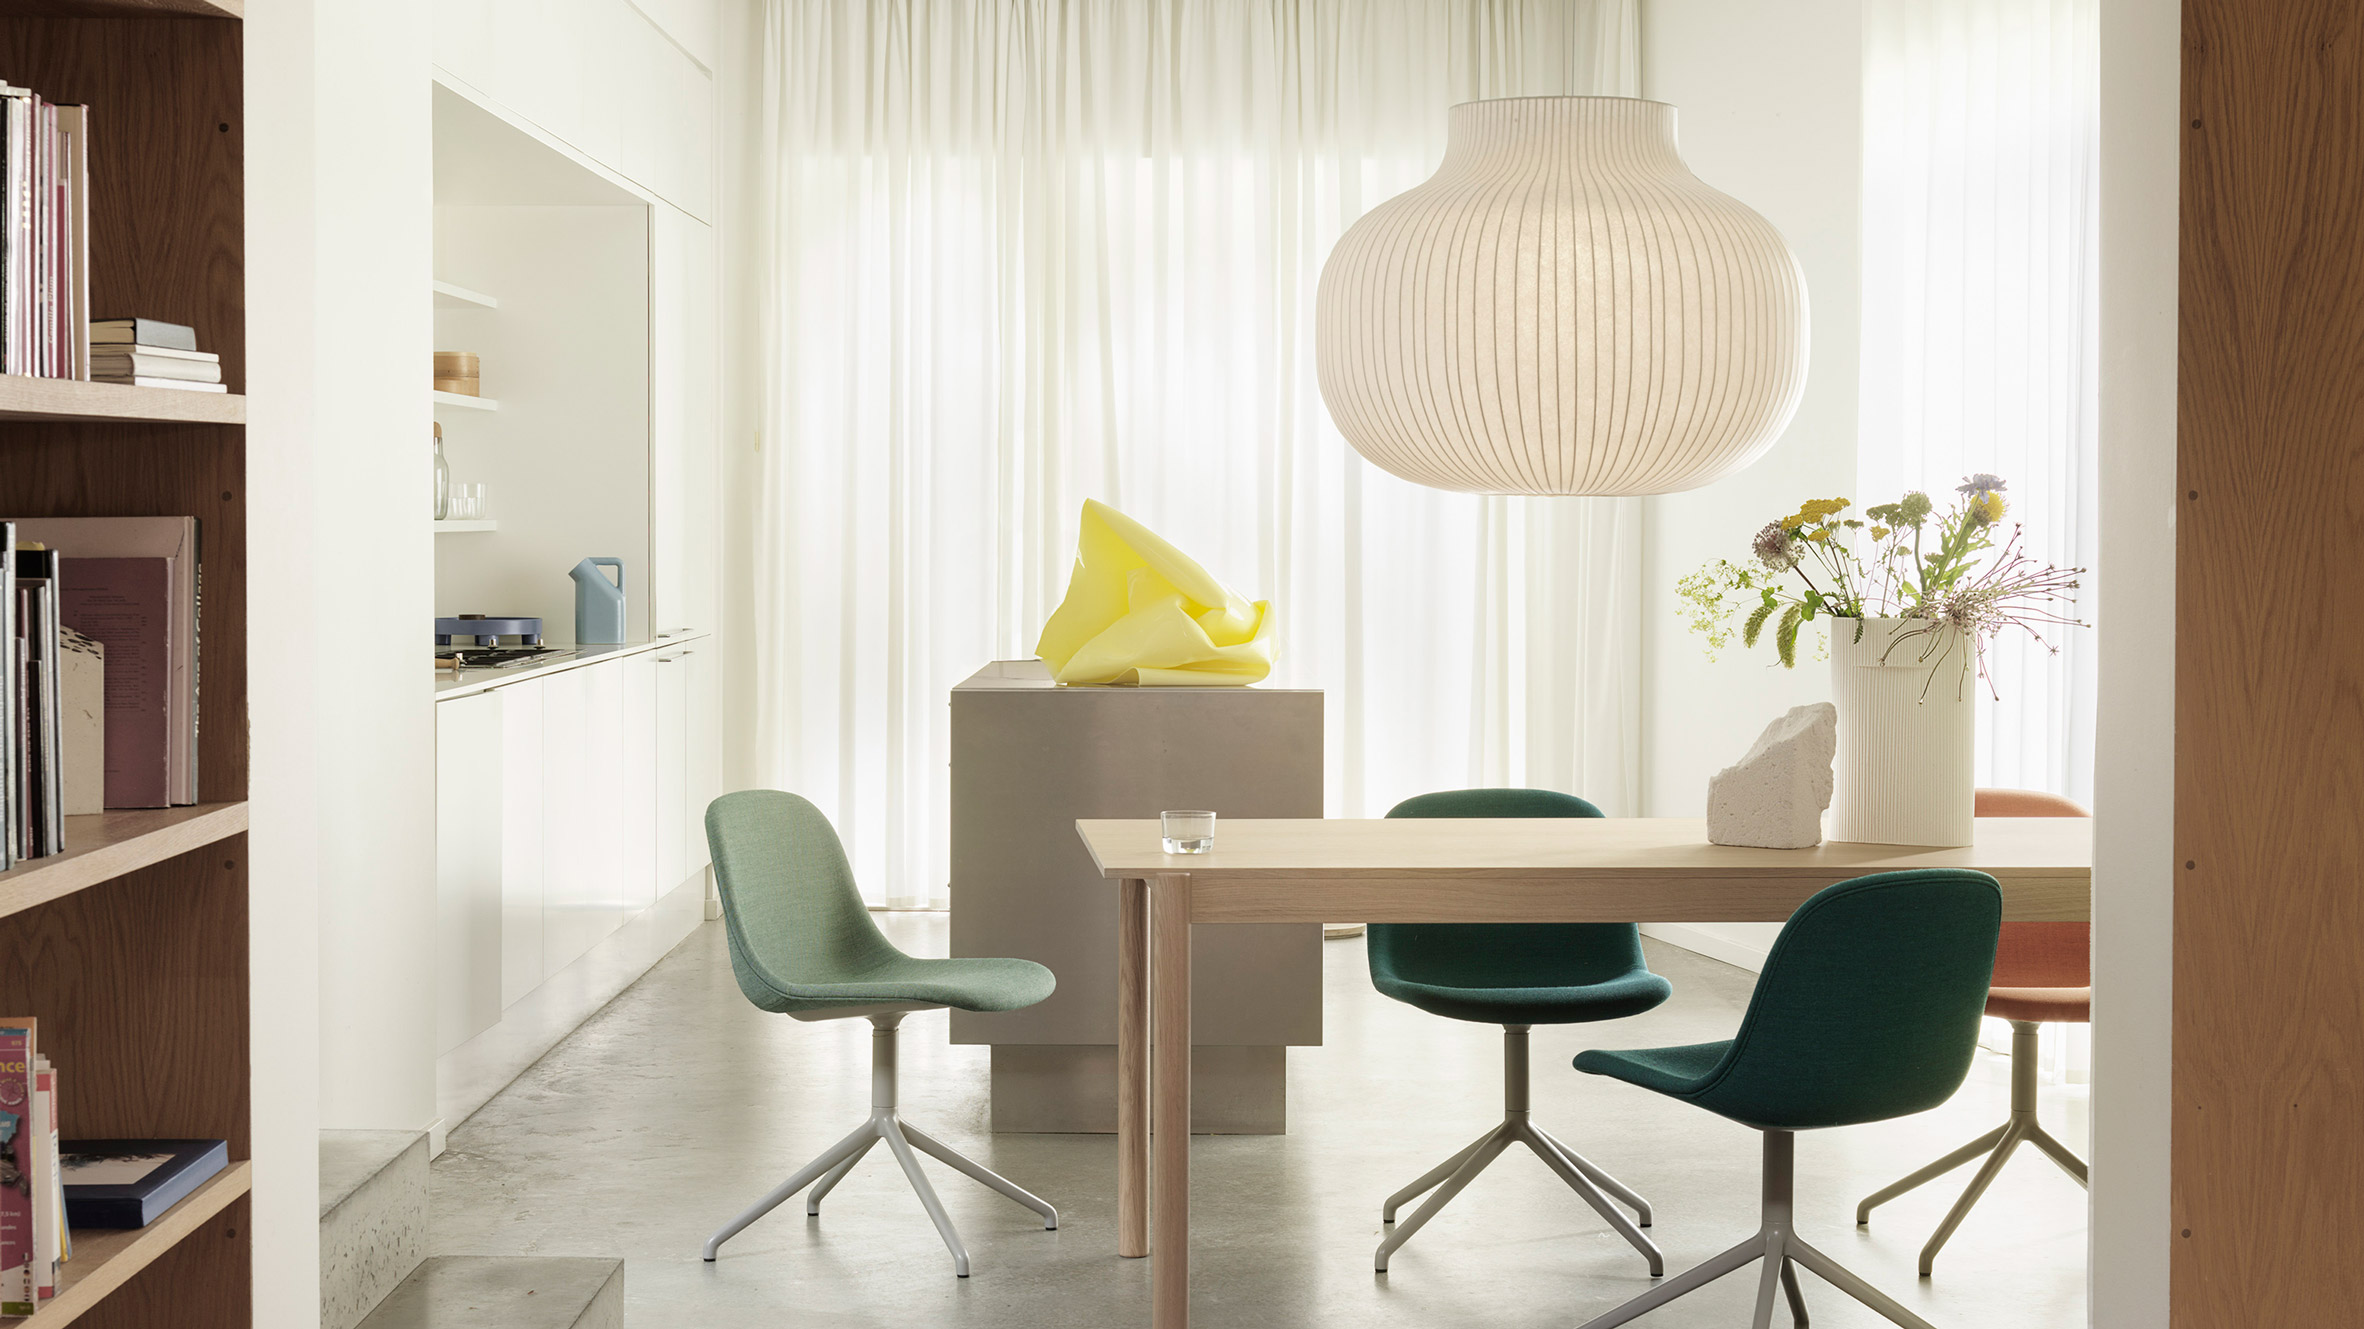 Layer Designs Pendant Lamps Based On Silkworm Cocoons For Muuto